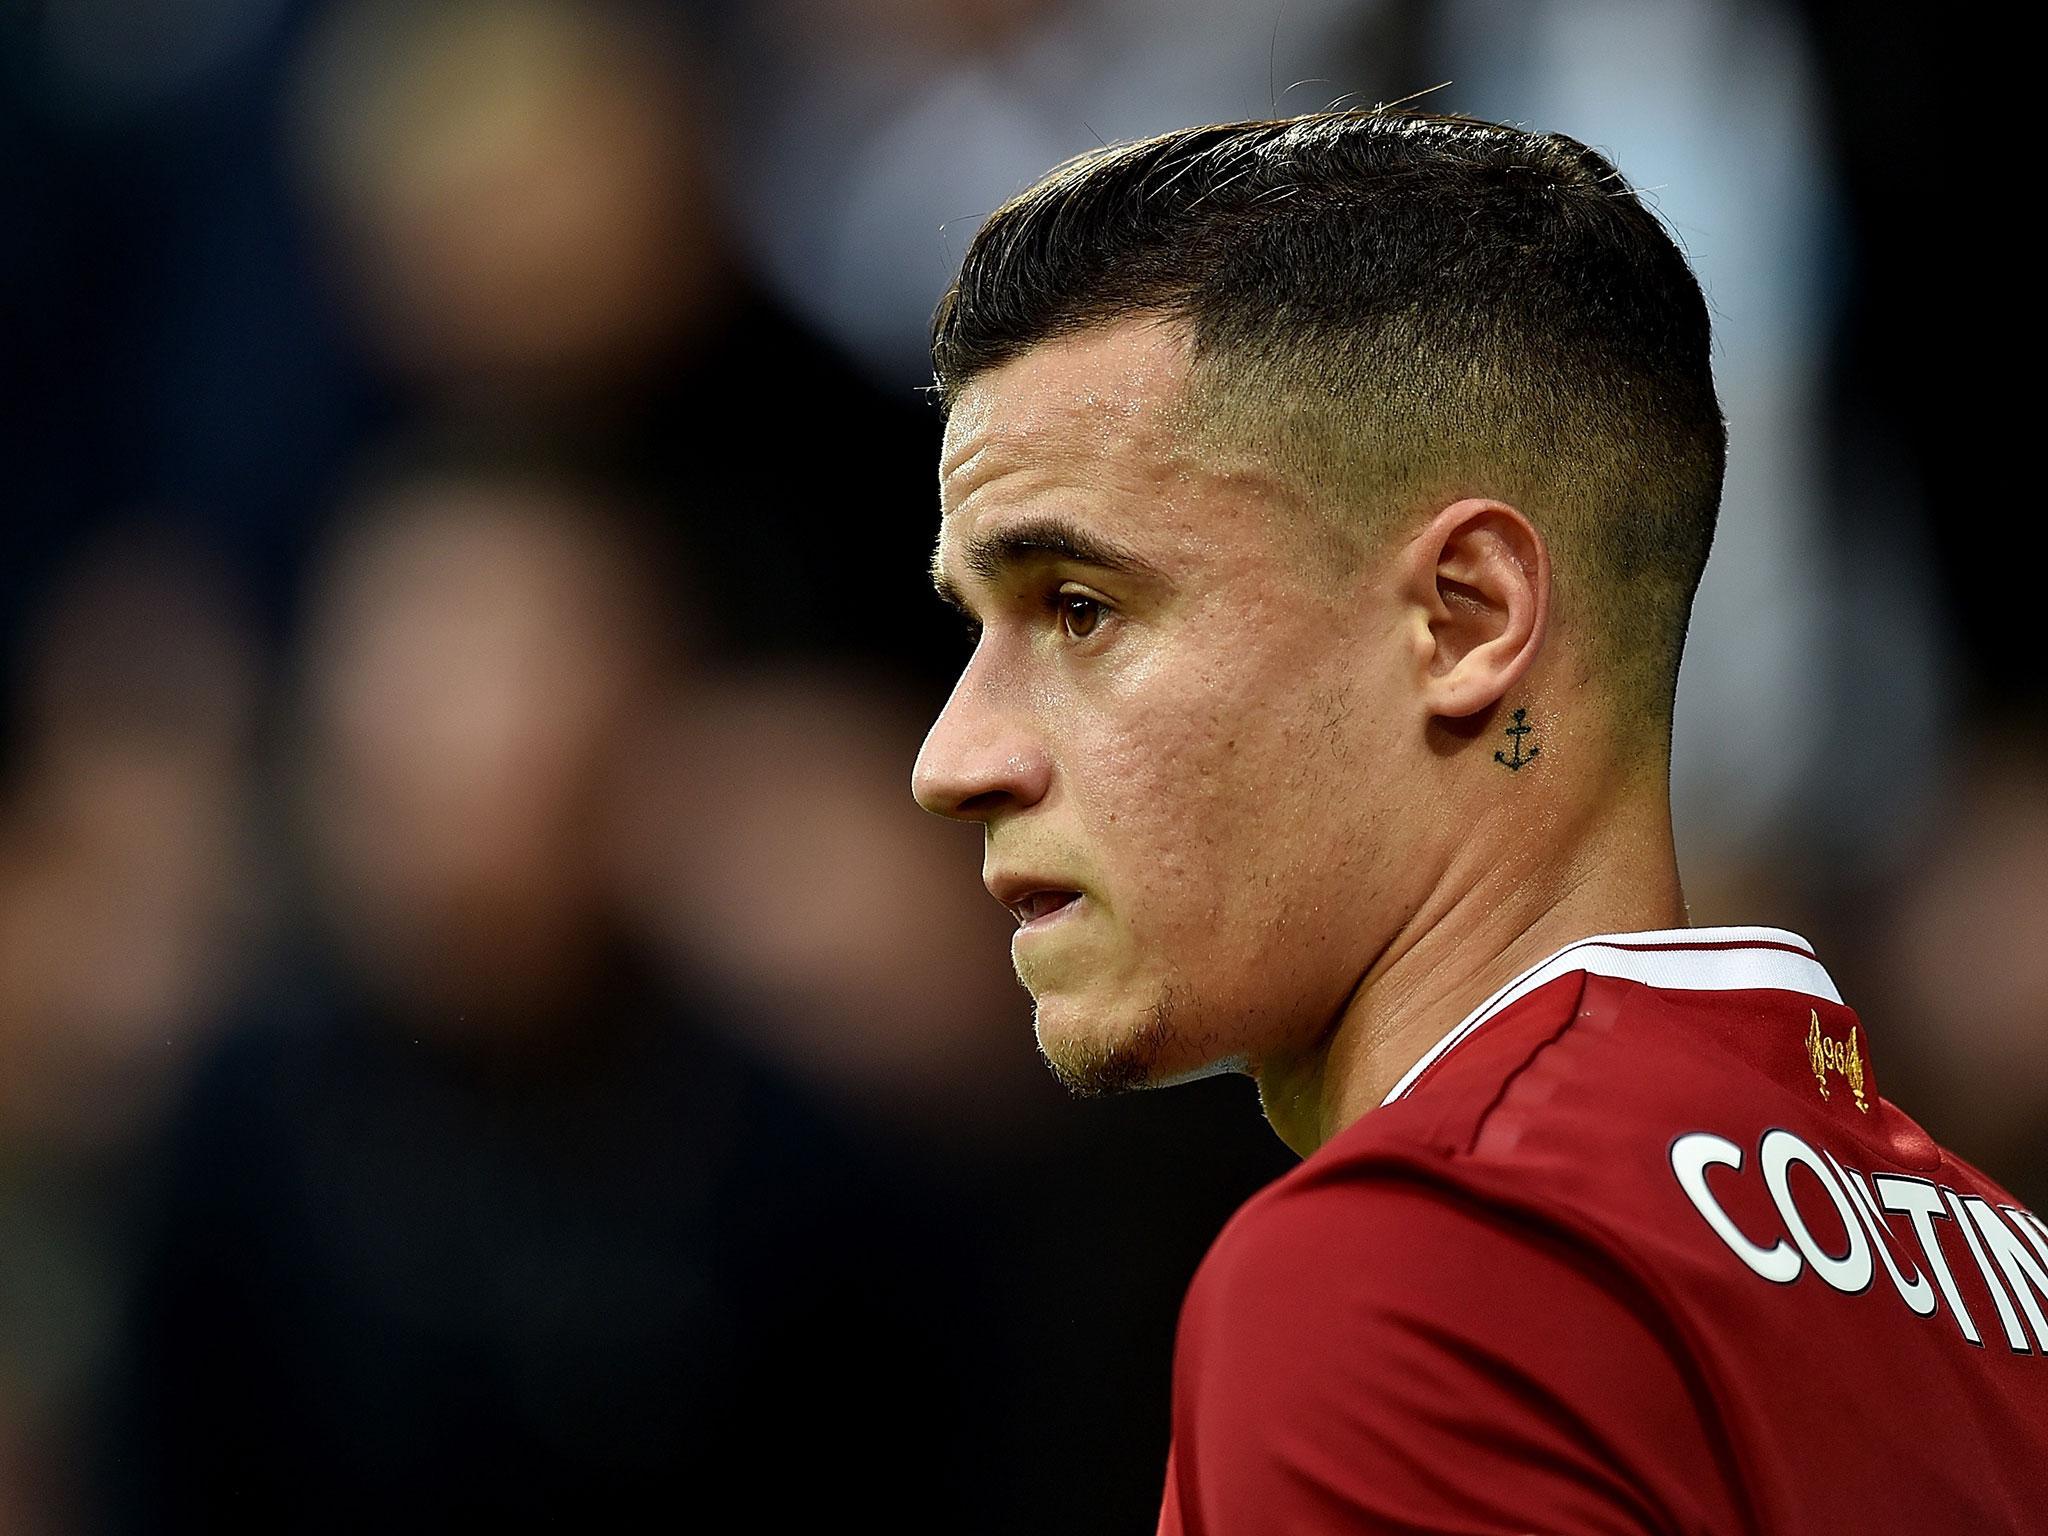 Philippe Coutinho will miss Liverpool's game with Huddersfield